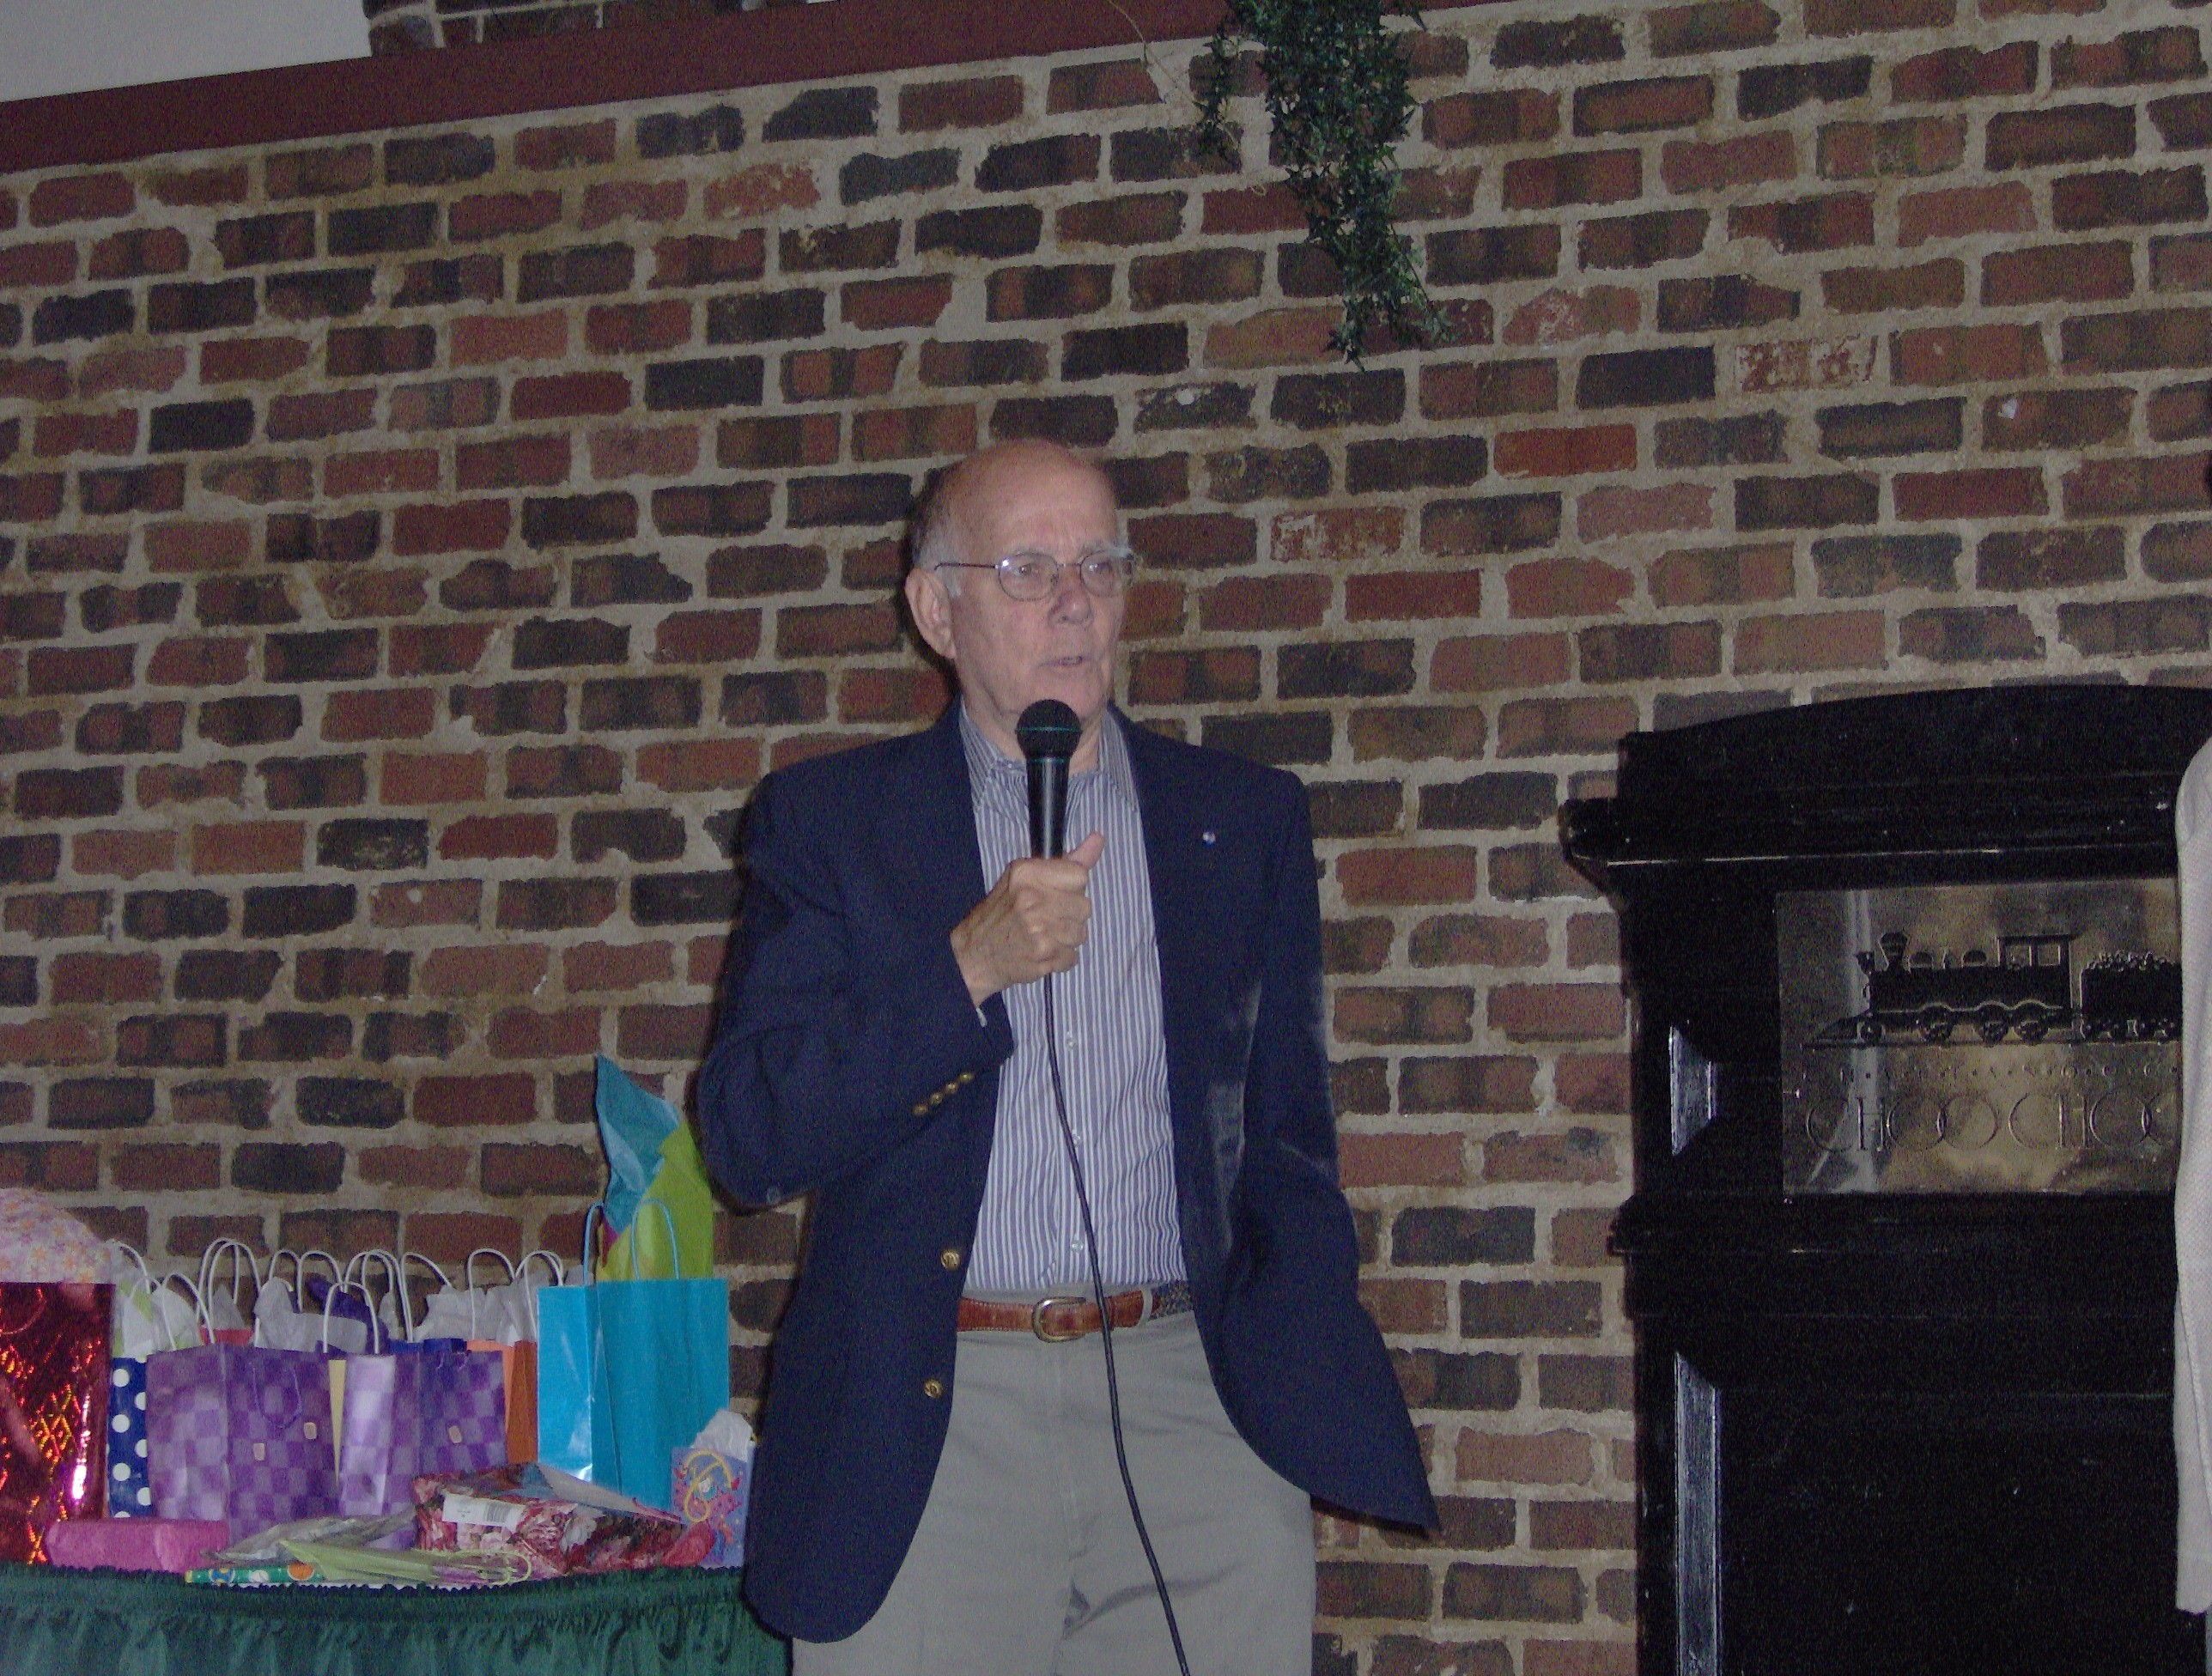 Bill Gann speaking at the 2006 OFHS meeting in Chattanooga, TN